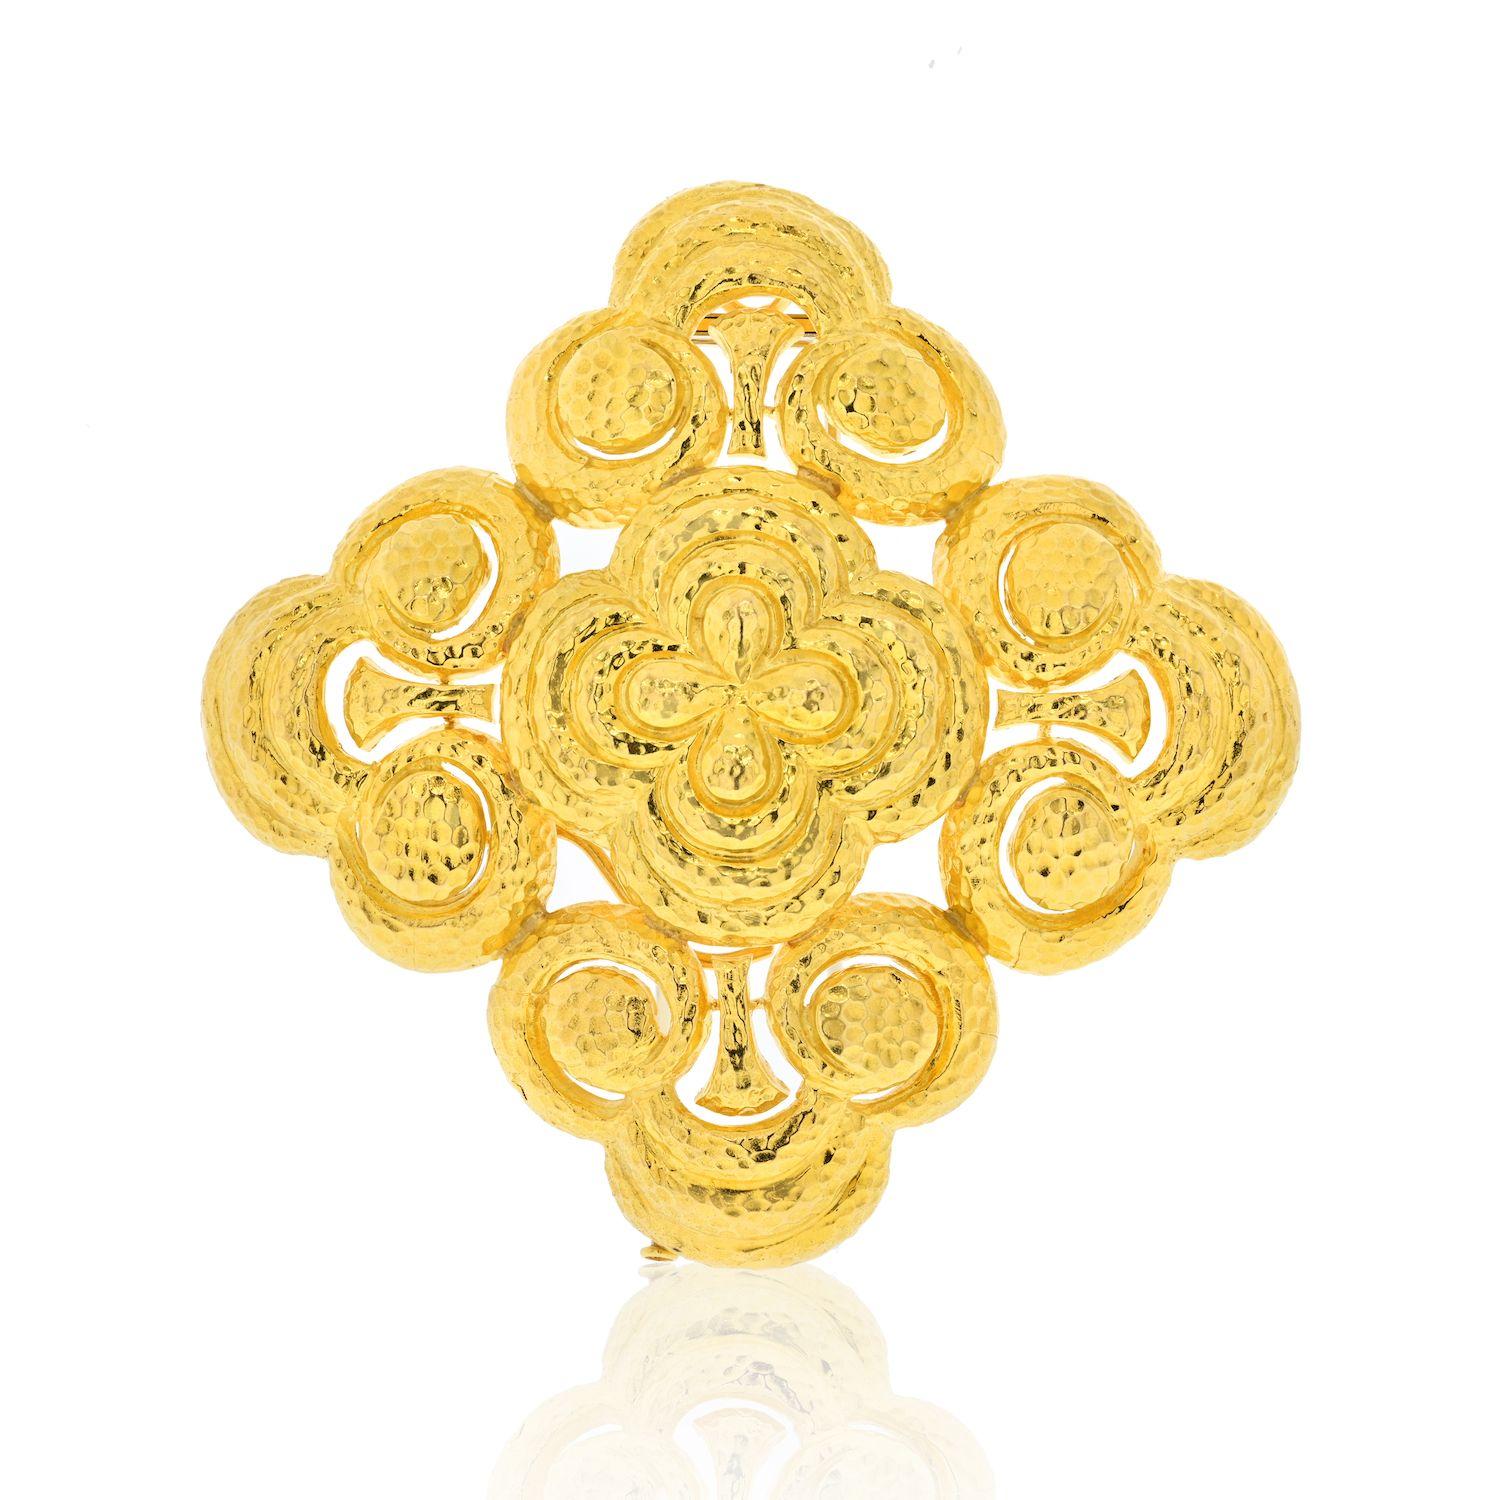 This is a classic David Webb 18K Yellow Gold Heraldic Hammered Finish Pendant Brooch. Perfect to place on your oversized sweater or attach to a David Webb chunky chain. This brooch is a perfect pendant too. 
Width: 3.5 inches.